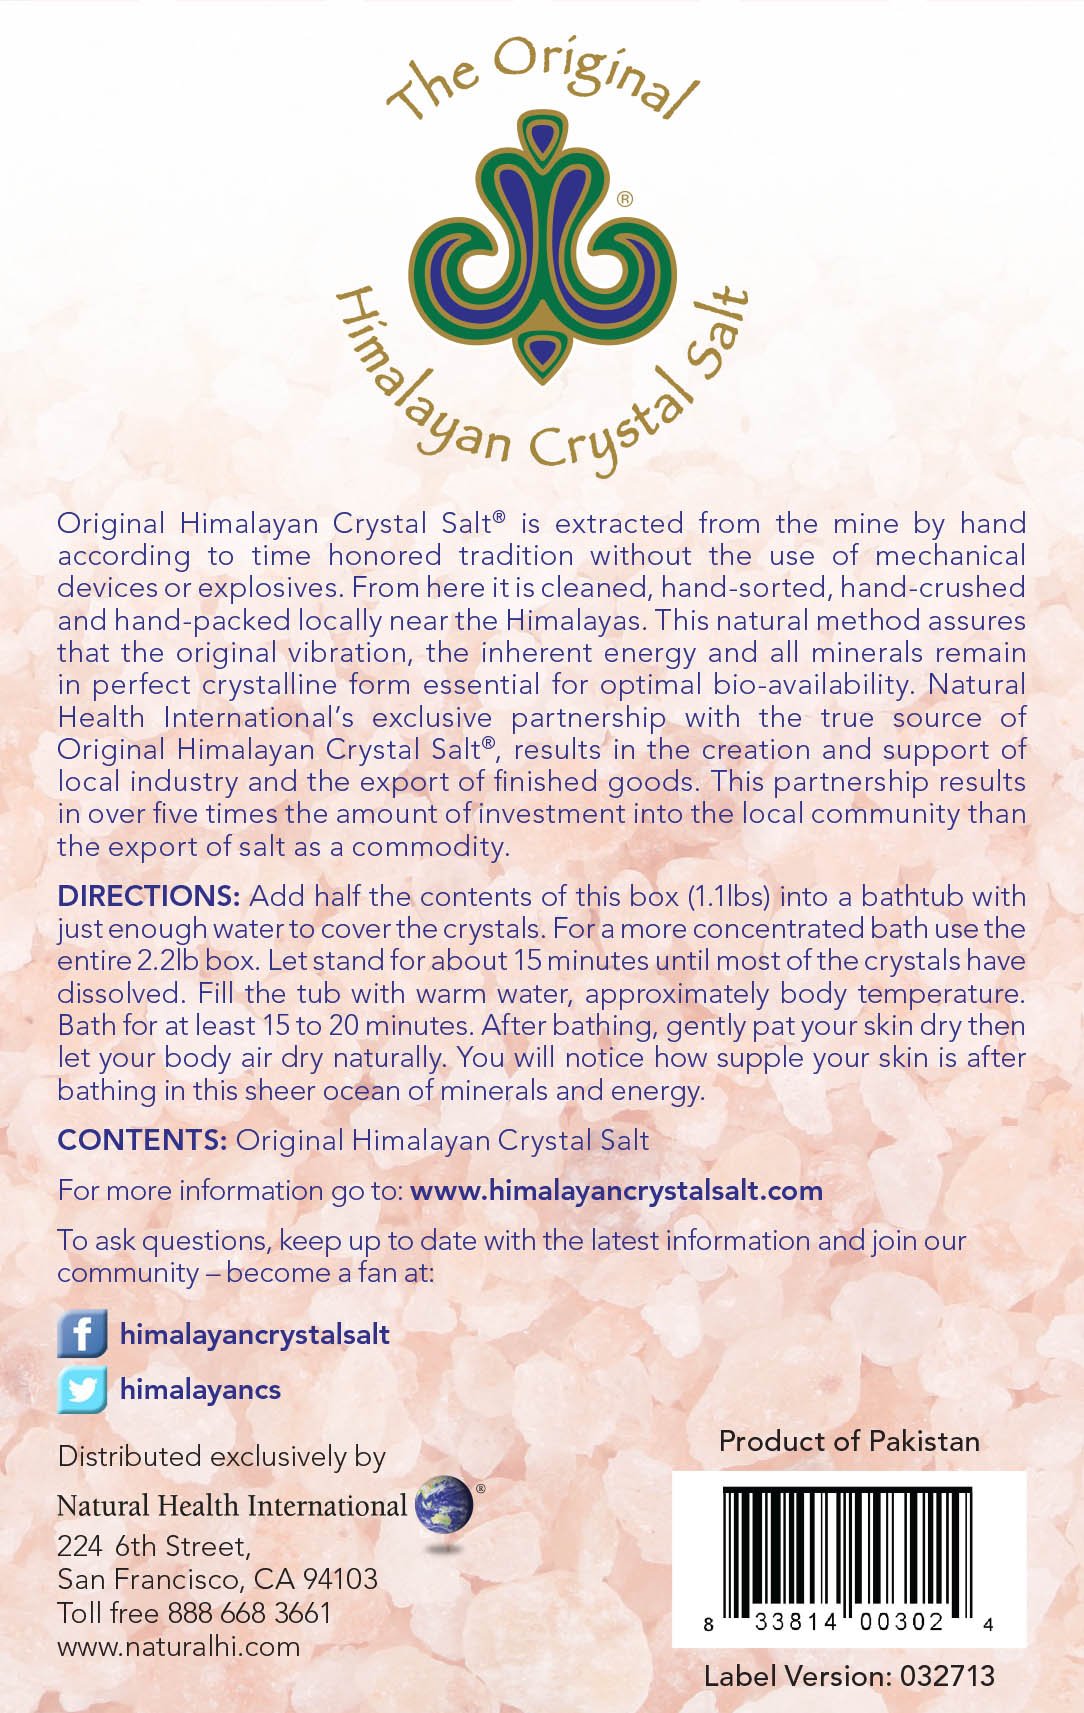 Original Himalayan Crystal Salt is extracted from the wine by hand according to time honored tradition without the use of mechanical devices or explosives. From here it is cleaned, hand-stored, hand-crushed and hand-packed locally near the Himalayas. This Natural method assures that the original vibration, the inherent energy and all minerals remain in perfect crystalline form essential for optimal bio-availability.